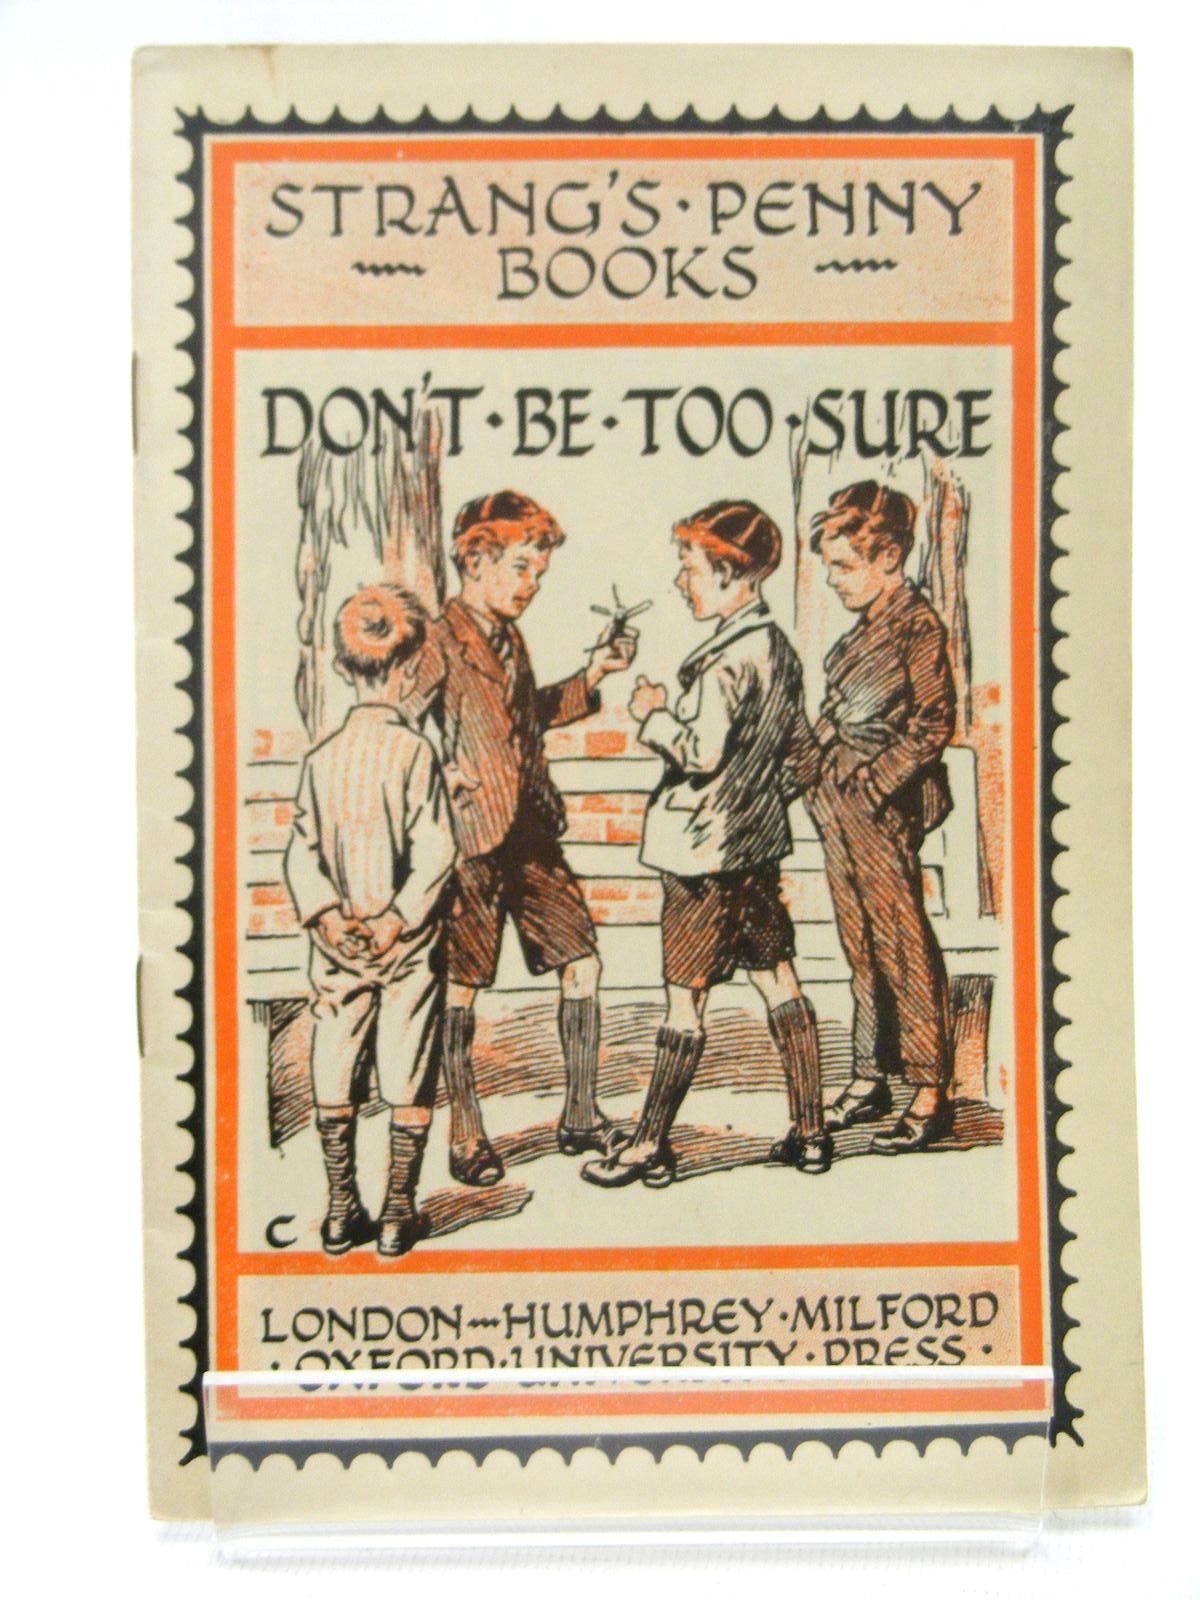 Photo of STRANG'S PENNY BOOKS DON'T BE TOO SURE written by Strang, Herbert published by Humphrey Milford, Oxford University Press (STOCK CODE: 2124879)  for sale by Stella & Rose's Books